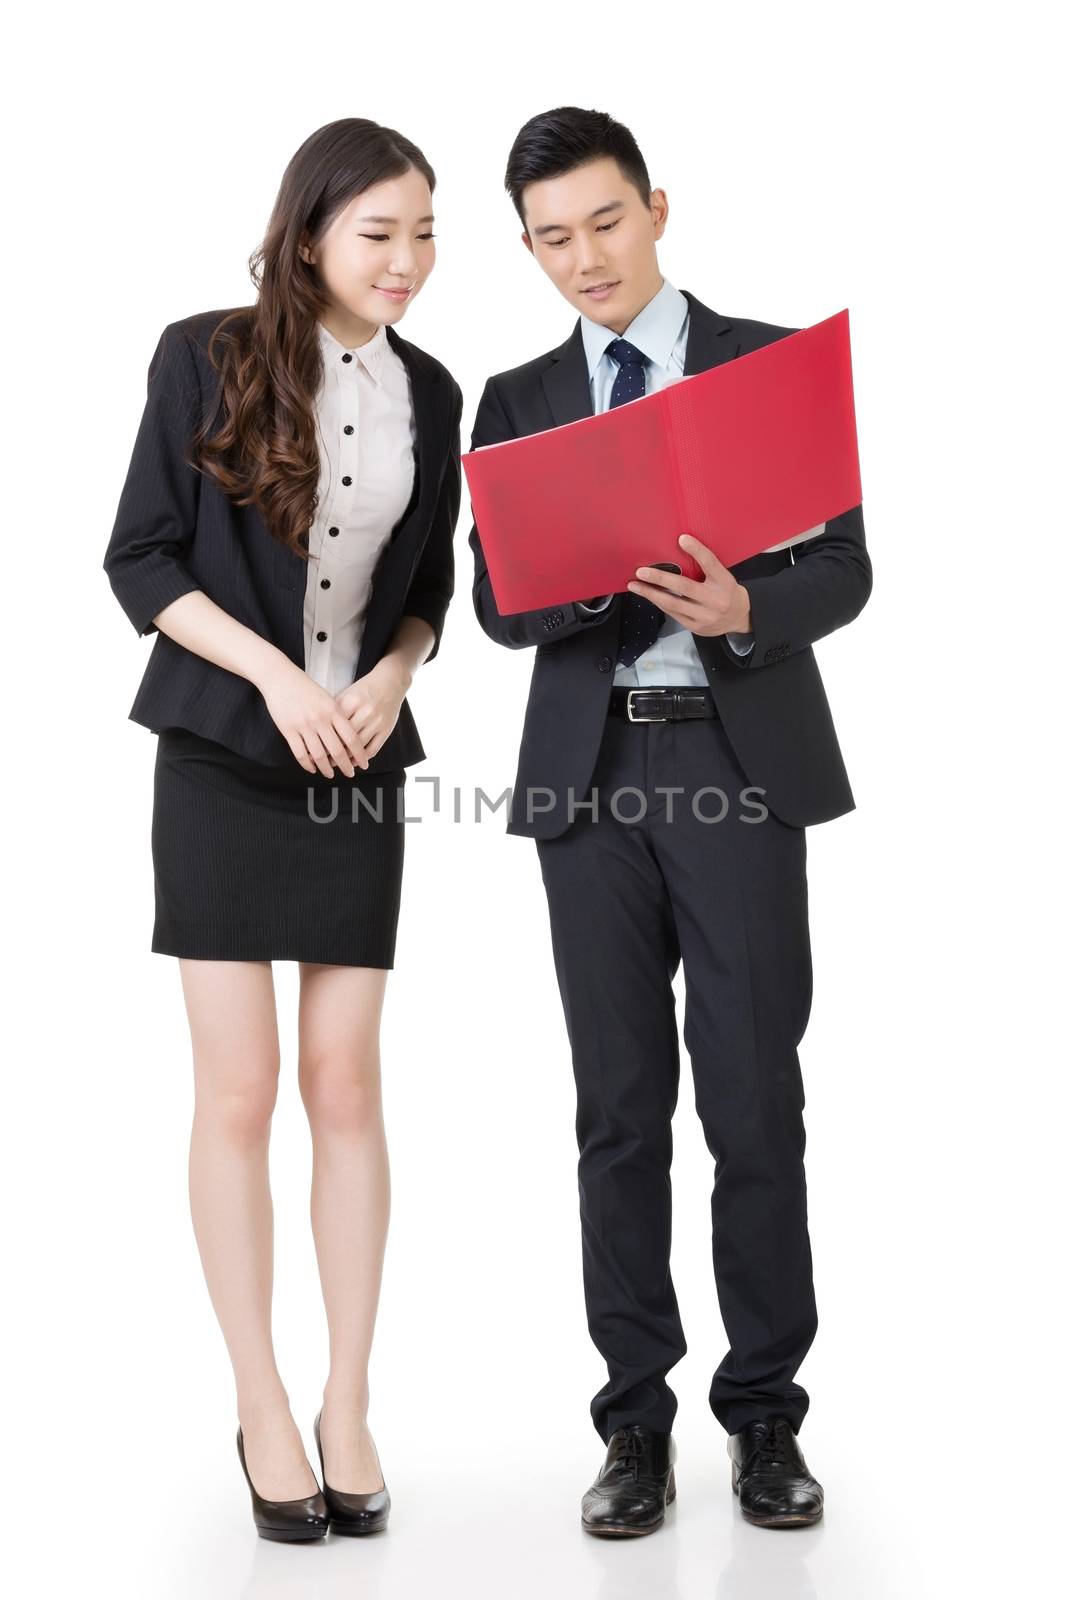 Asian business man and woman discussing, full length portrait isolated on white background.